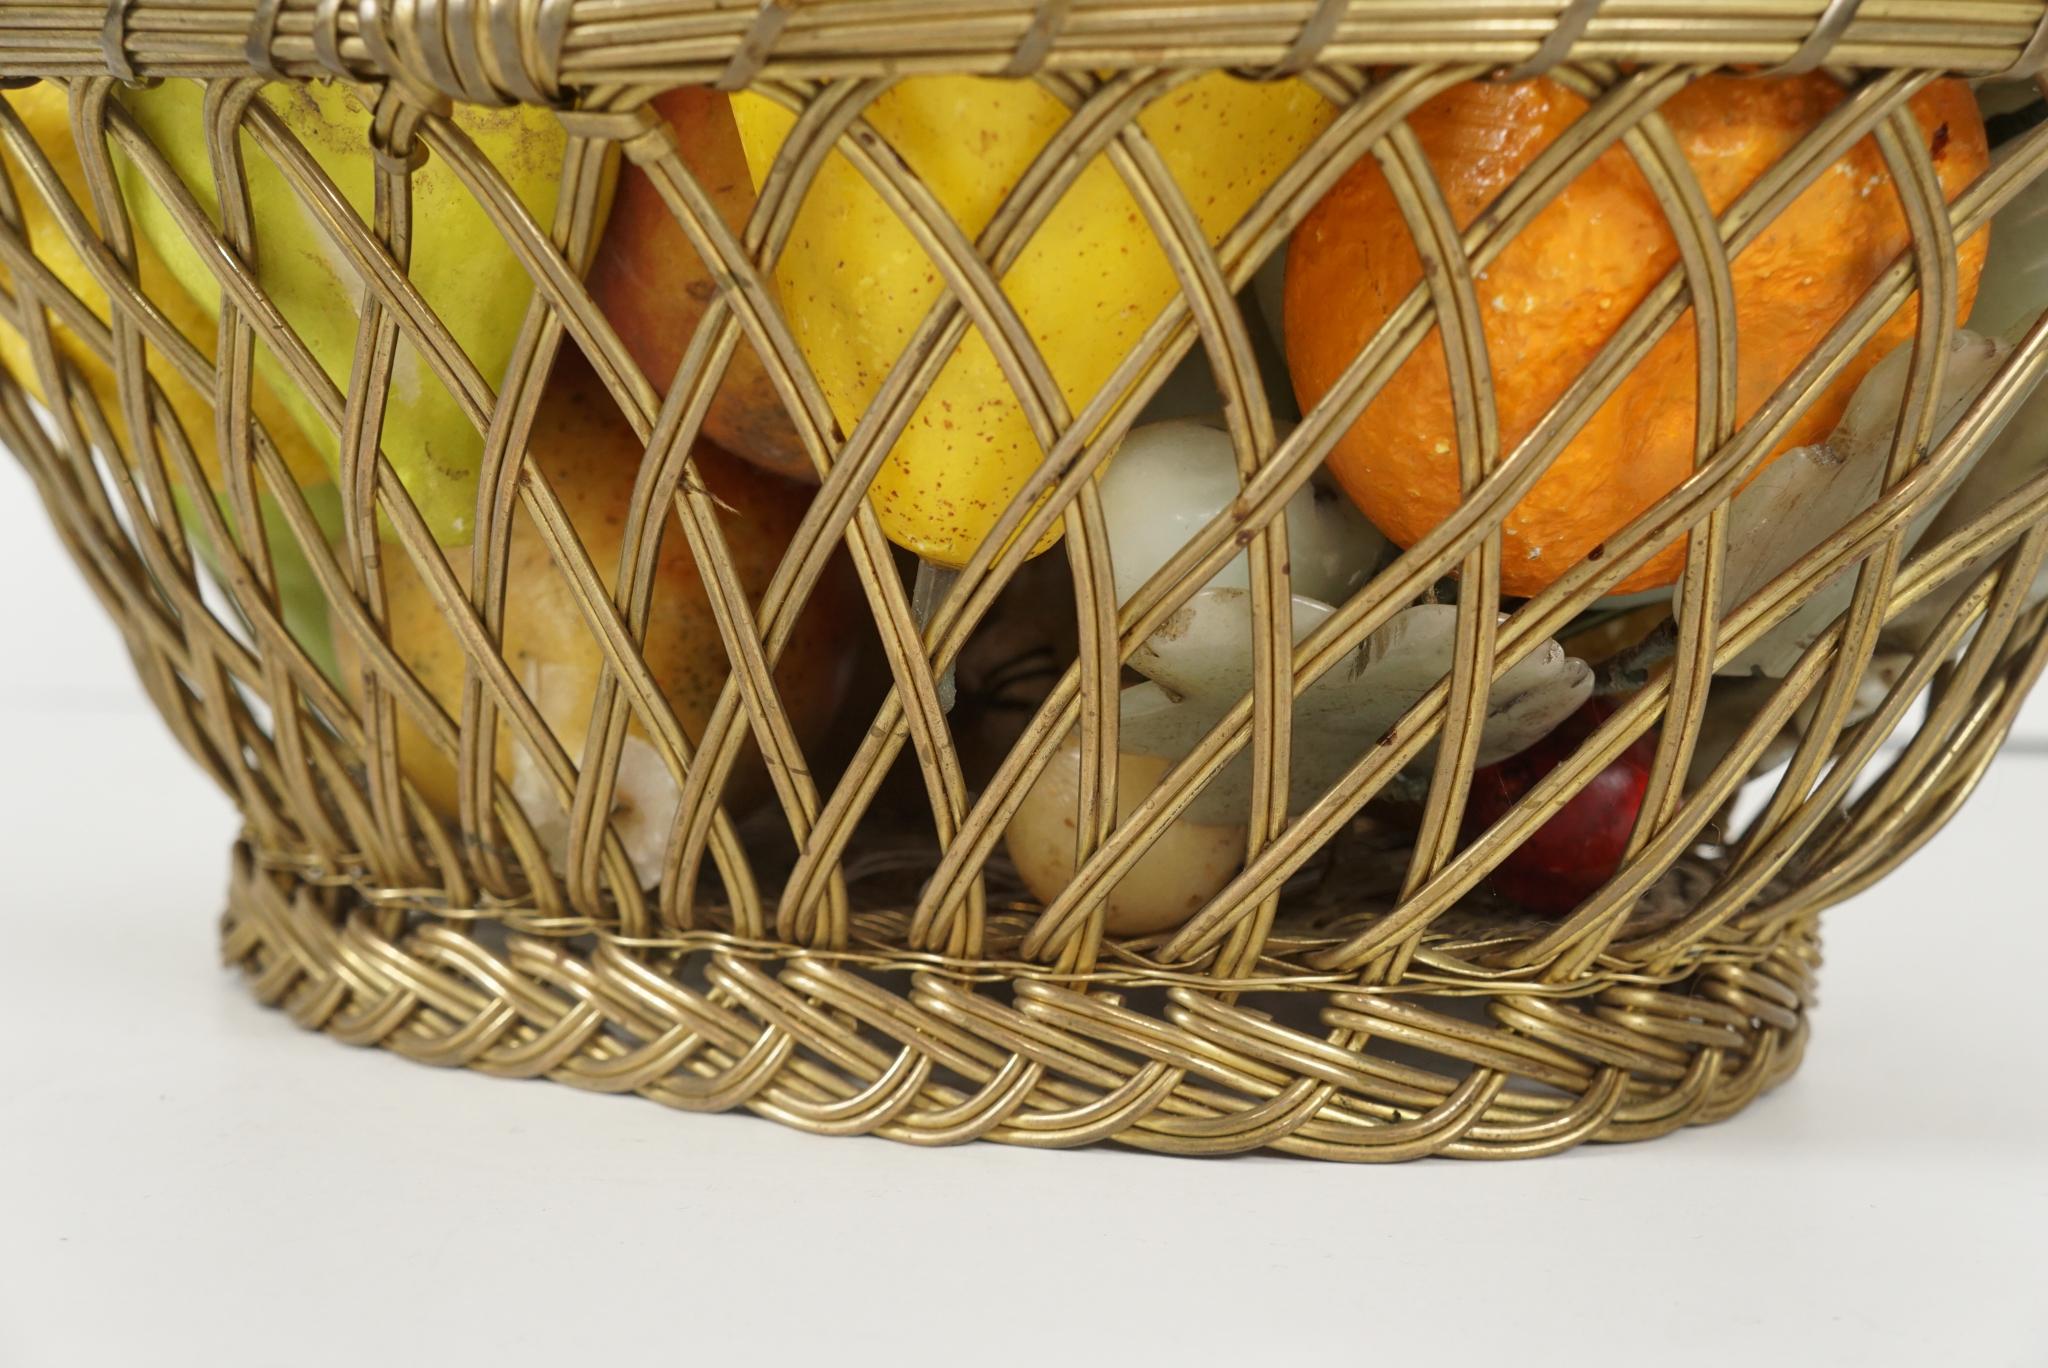 19th Century French Brass Wire Basket with Carved Stone Fruit from Estate of Bunny Mellon